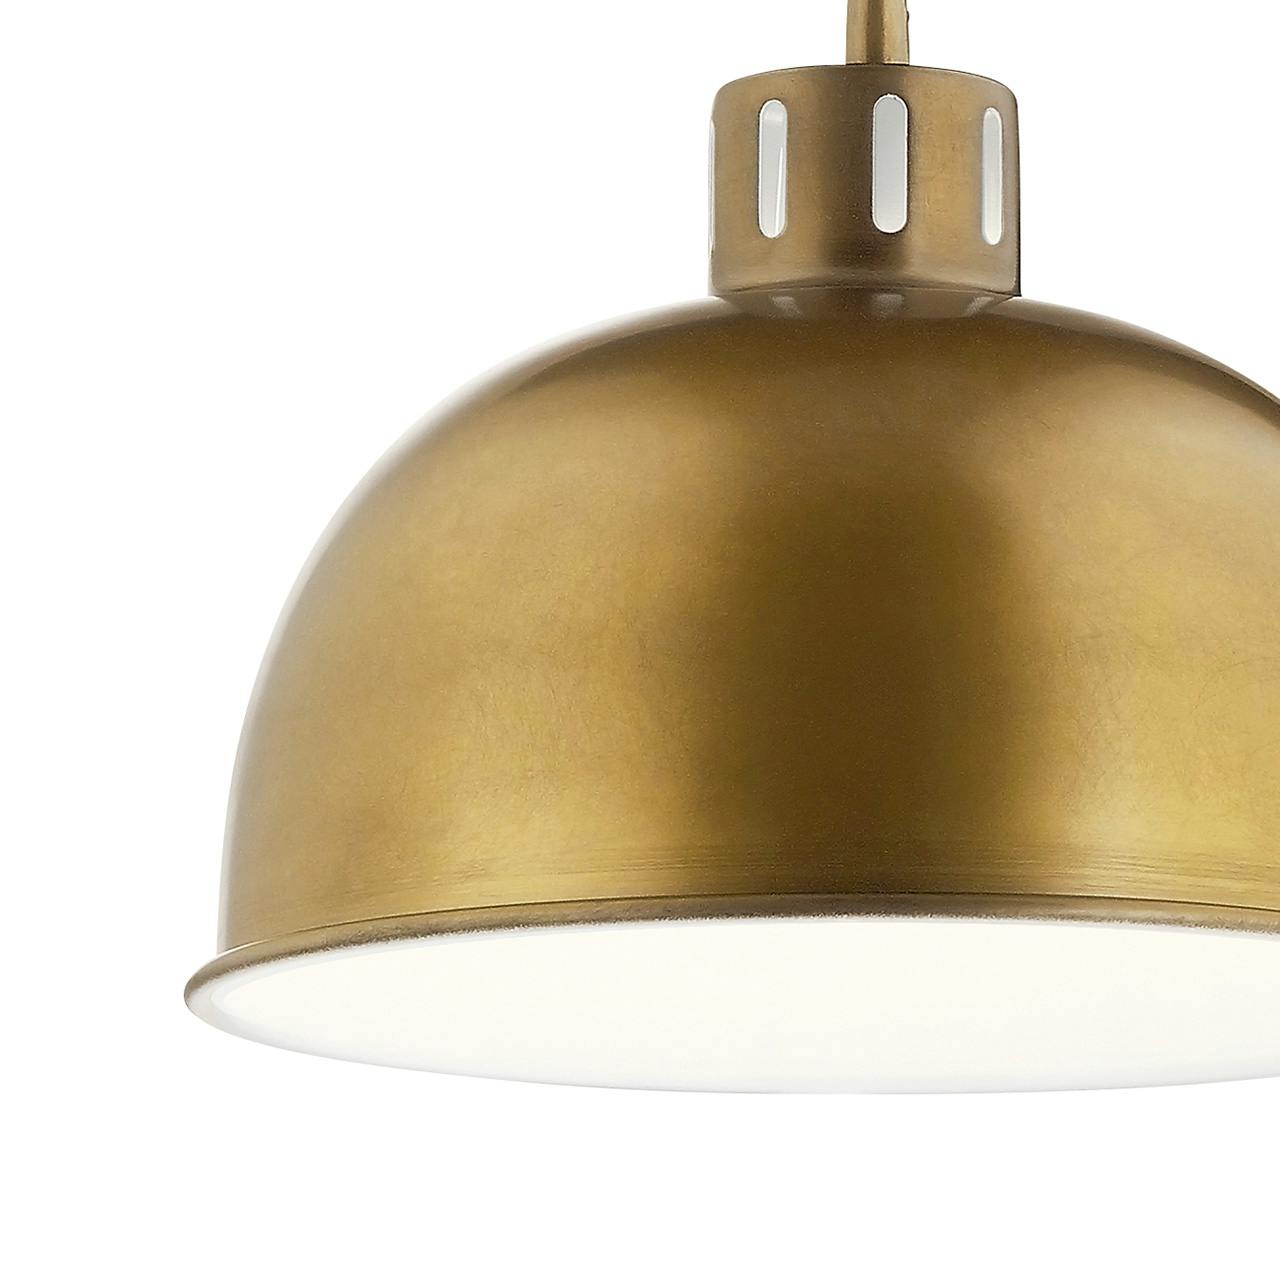 Close up view of the Zailey 9" 1 Light Pendant in Brass on a white background